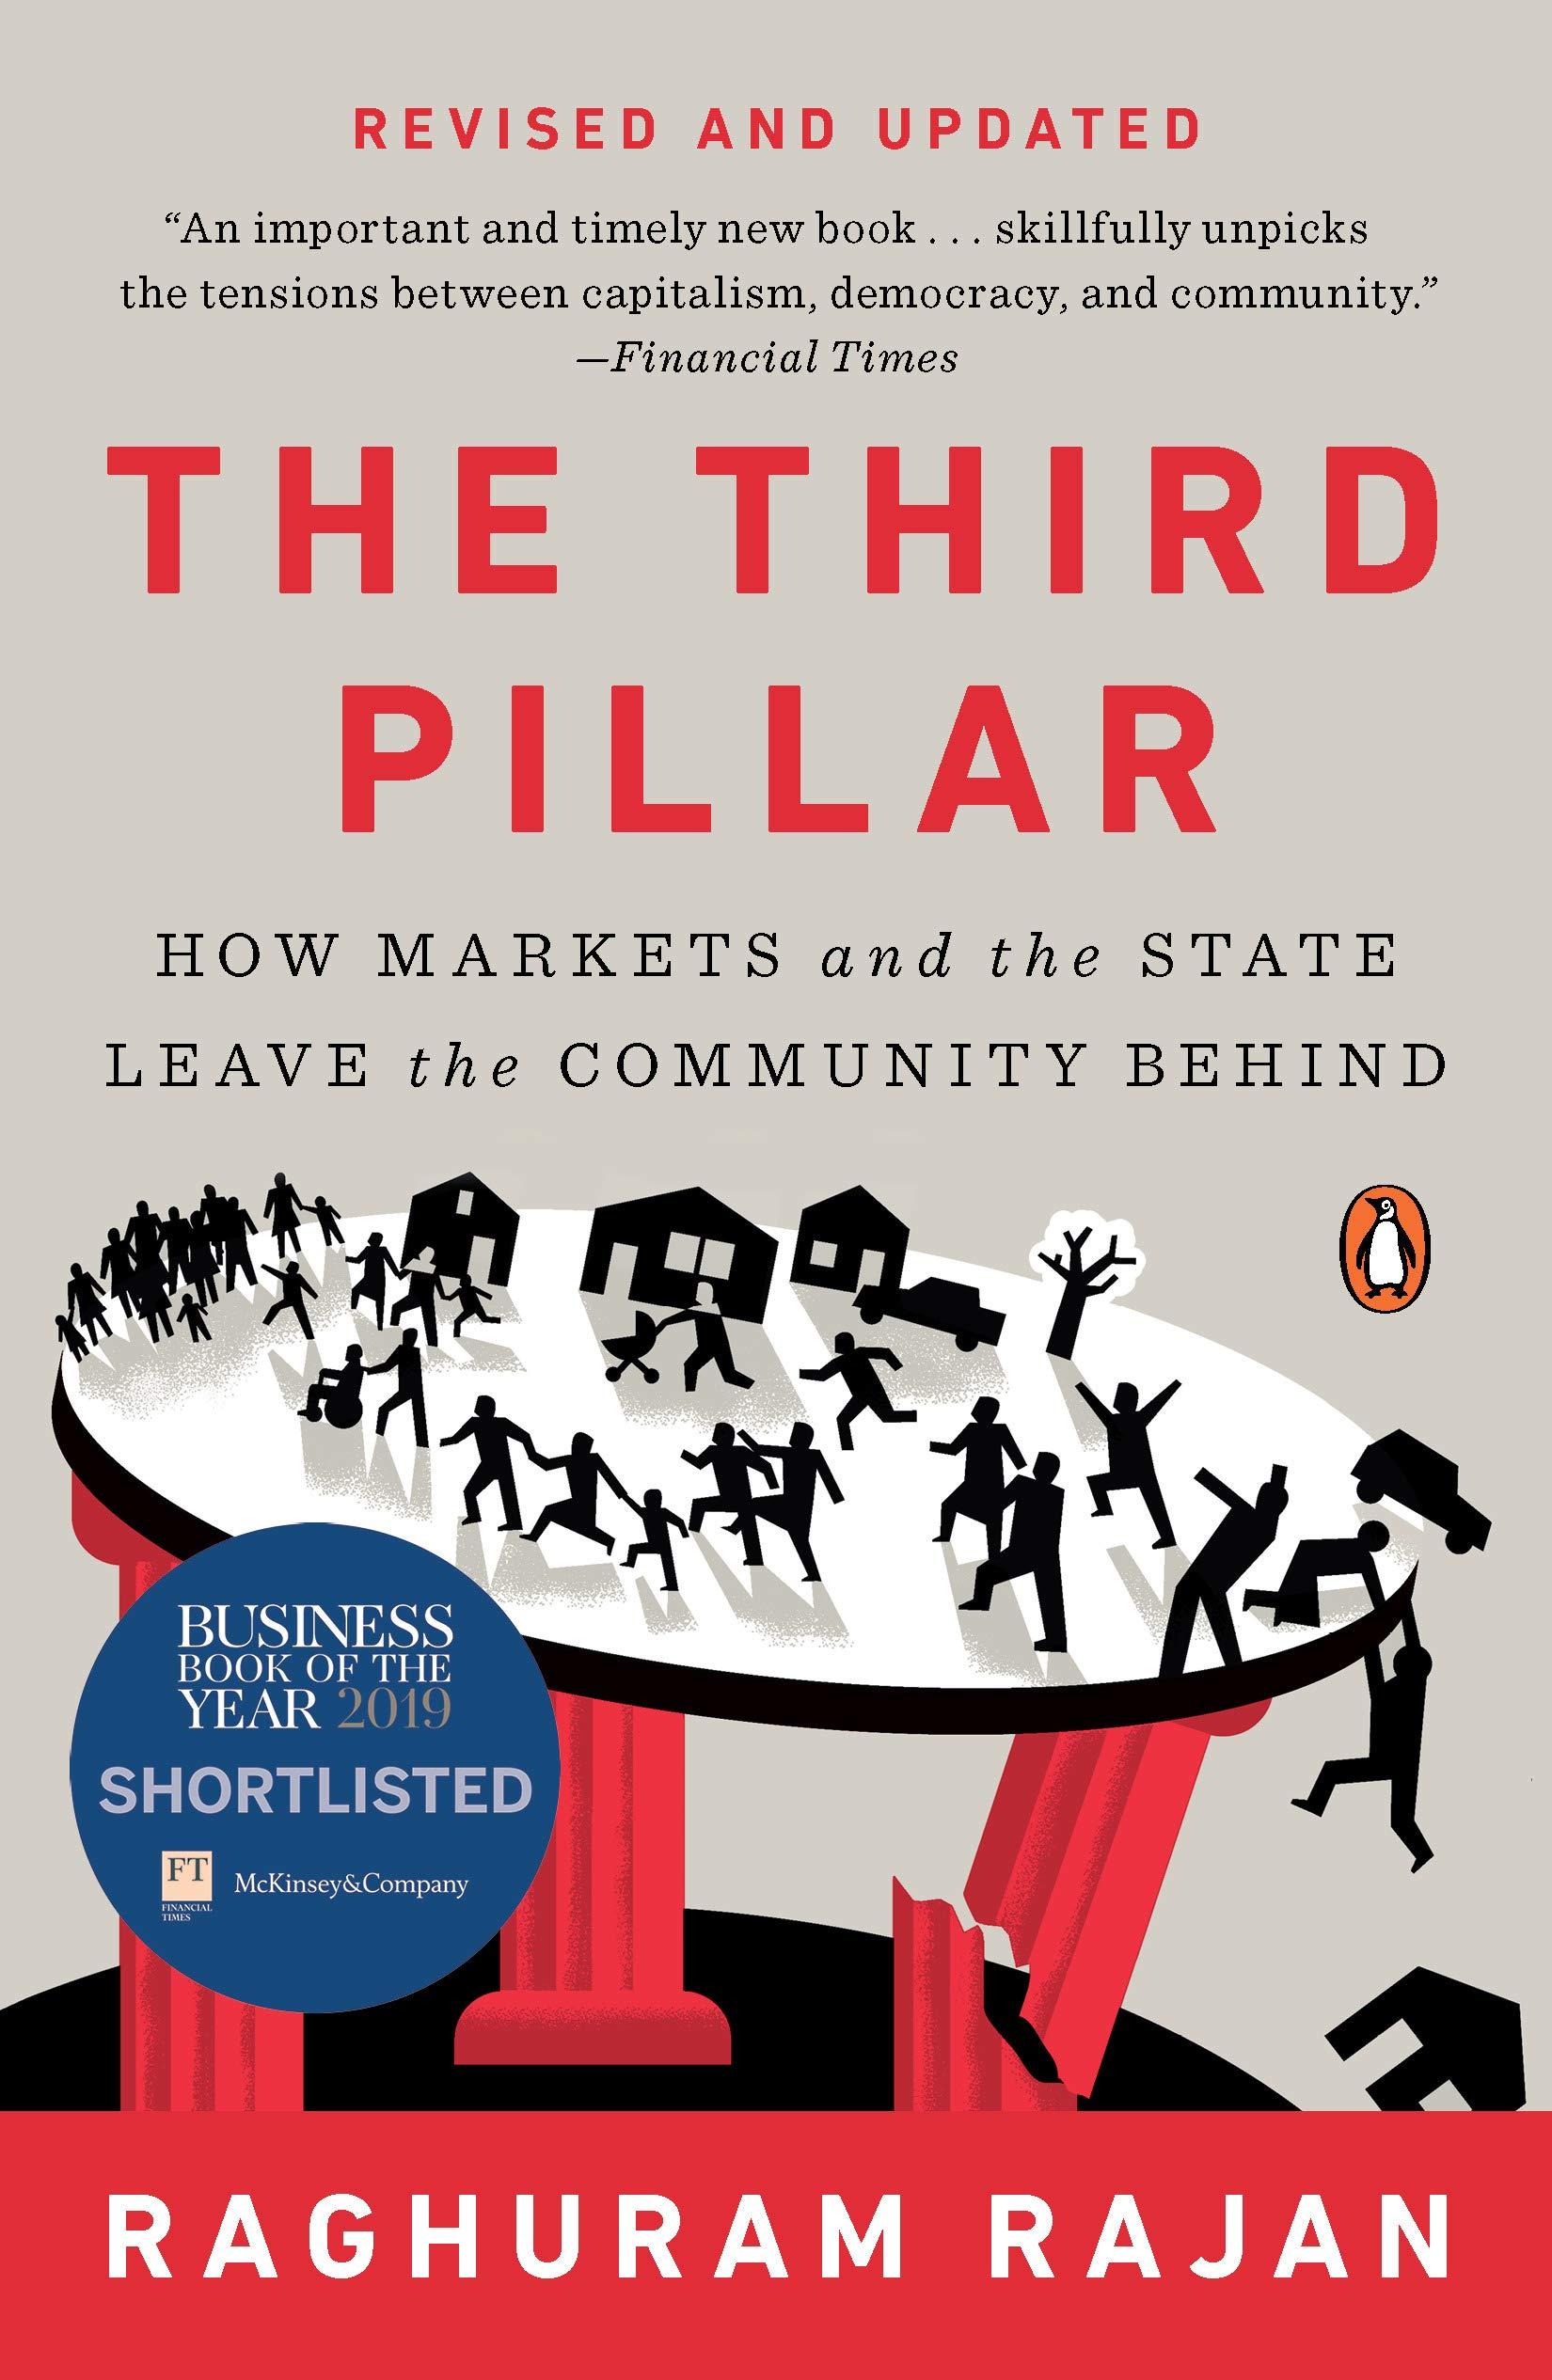 The Third Pillar - HOW MARKETS AND THE STATE LEAVE THE COMMUNITY BEHIND